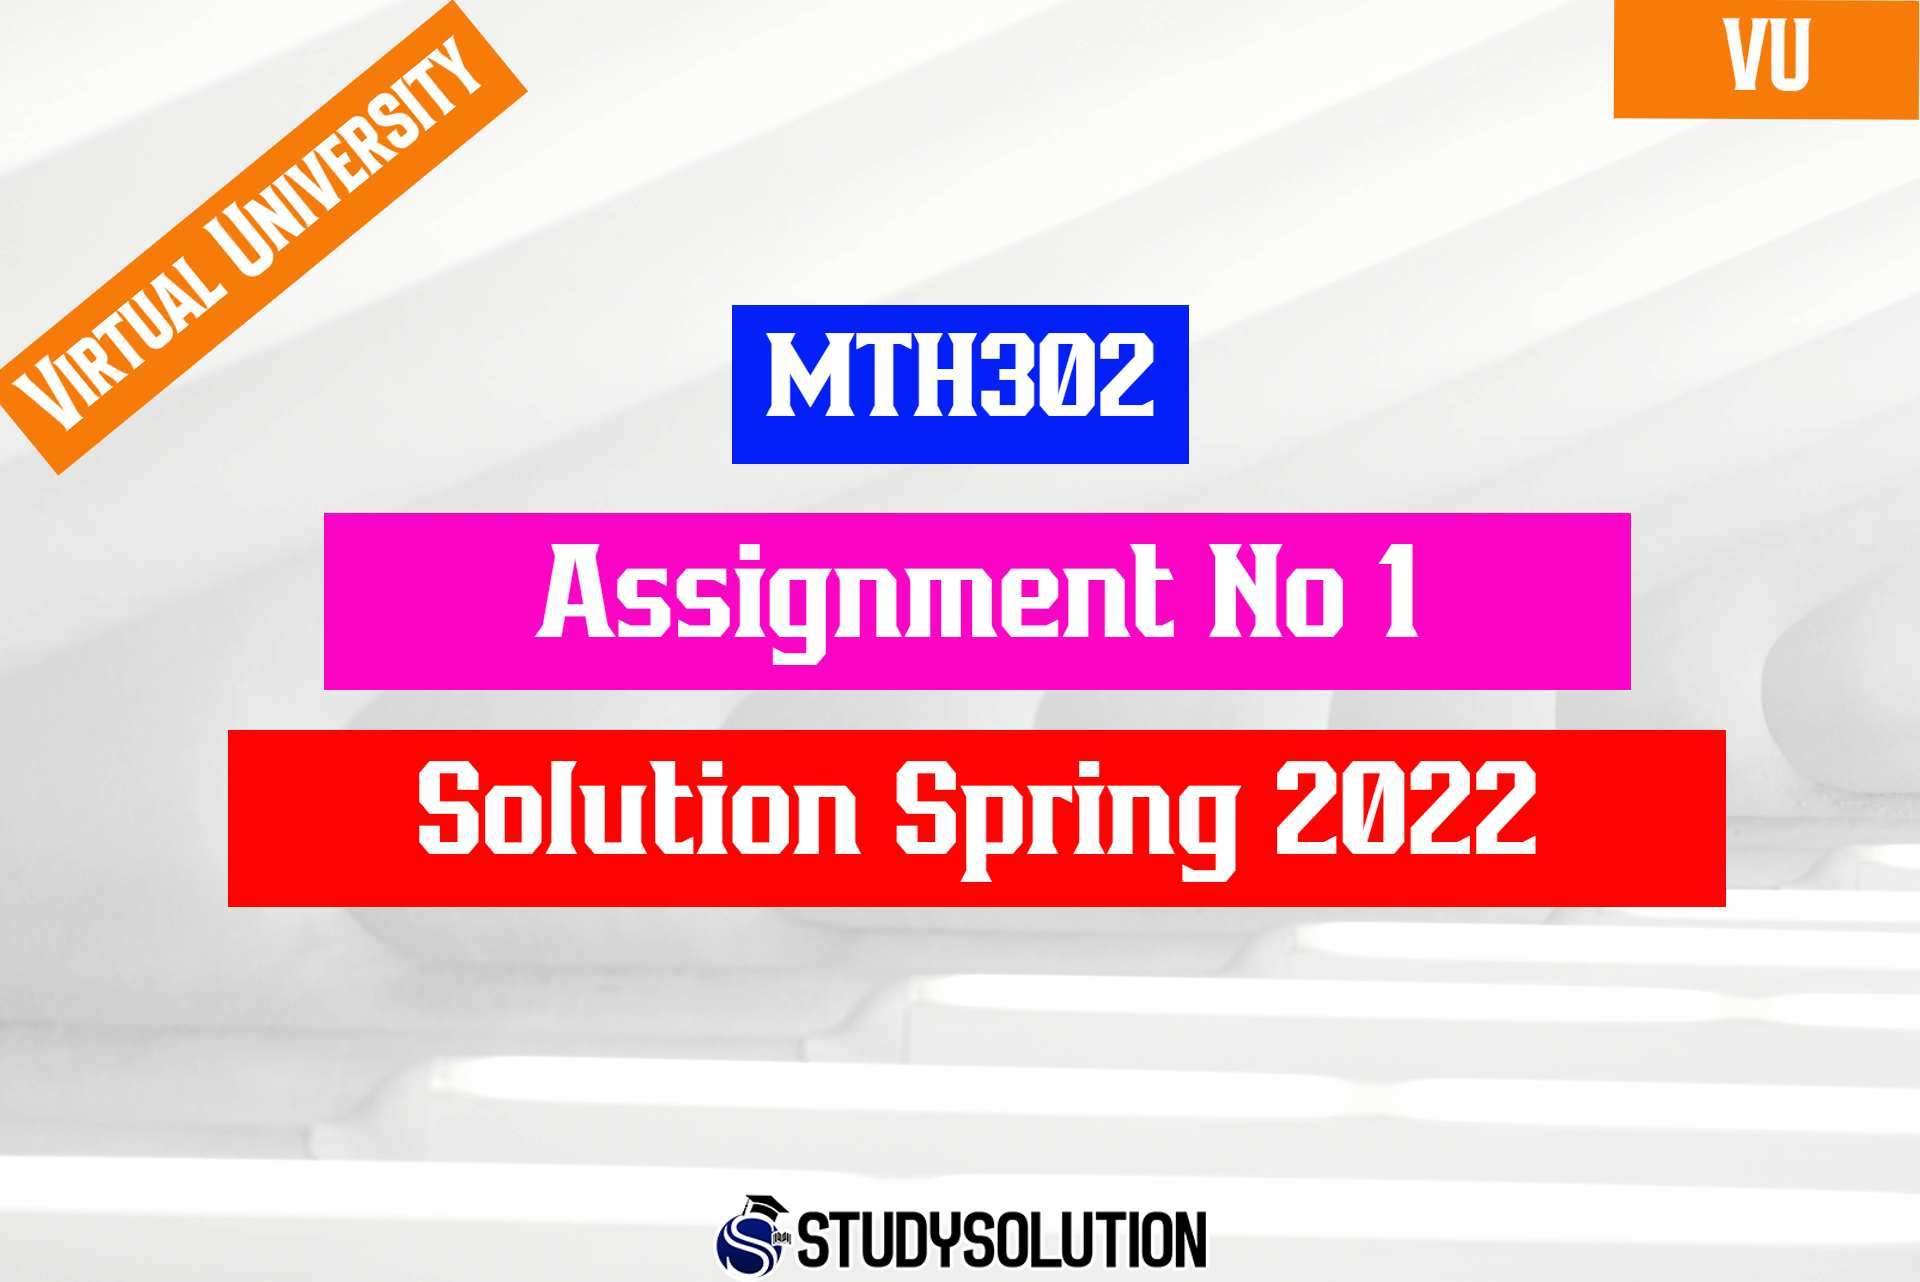 MTH302 Assignment No 1 Solution Spring 2022